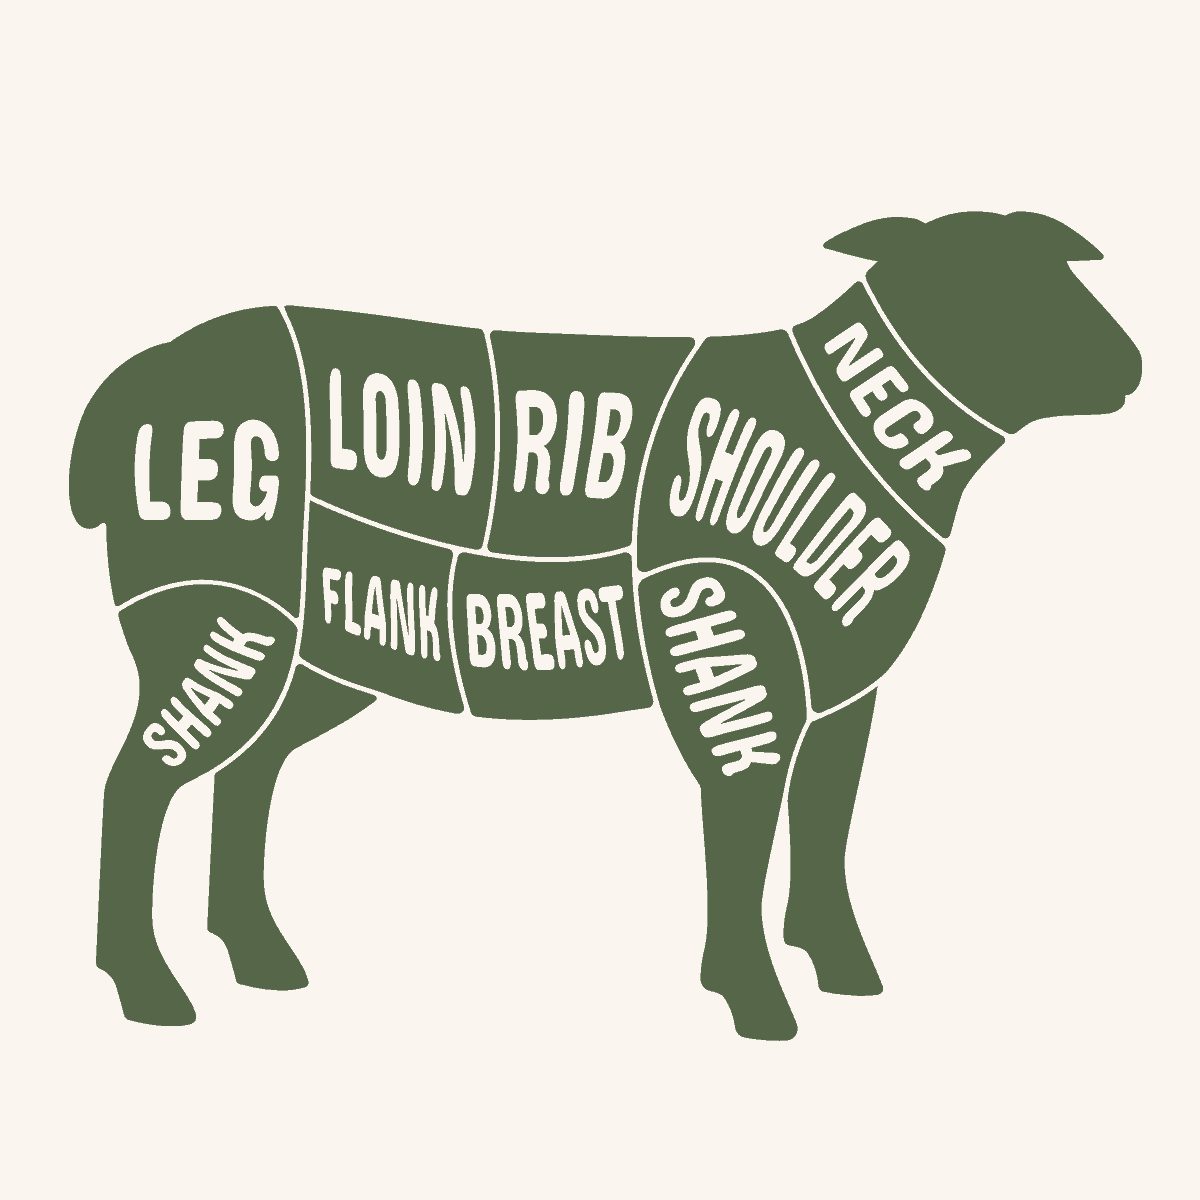 A graphic showing the cuts of lamb and mutton meat.